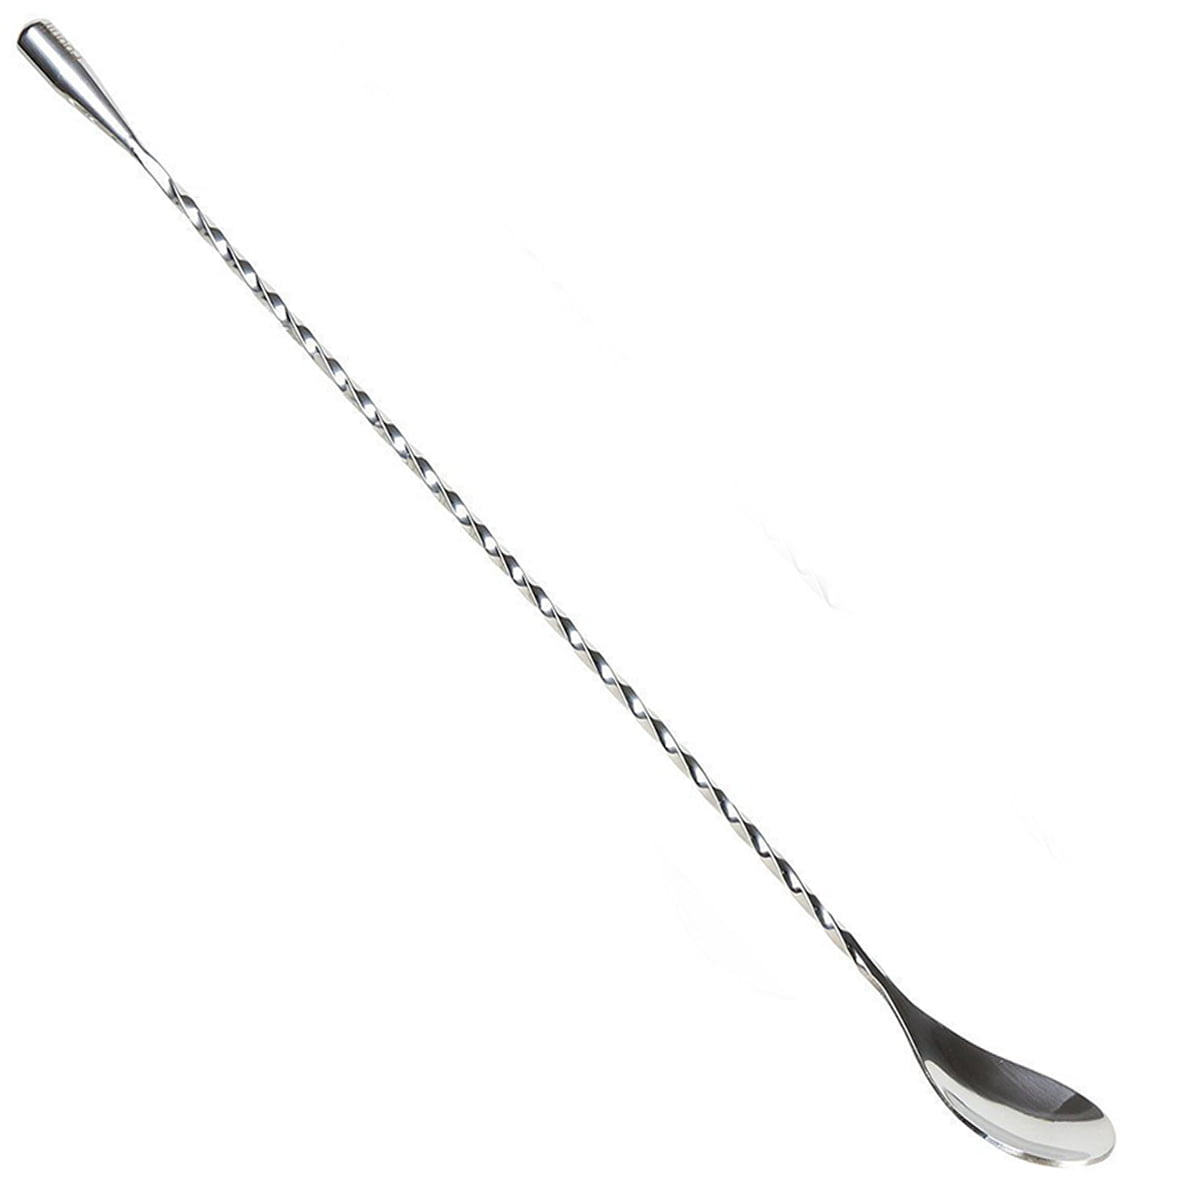 SourceTon Spiral Pattern Bar Cocktail Shaker Spoon 4 PCS 12 Inch Stainless Steel Mixing Spoons 